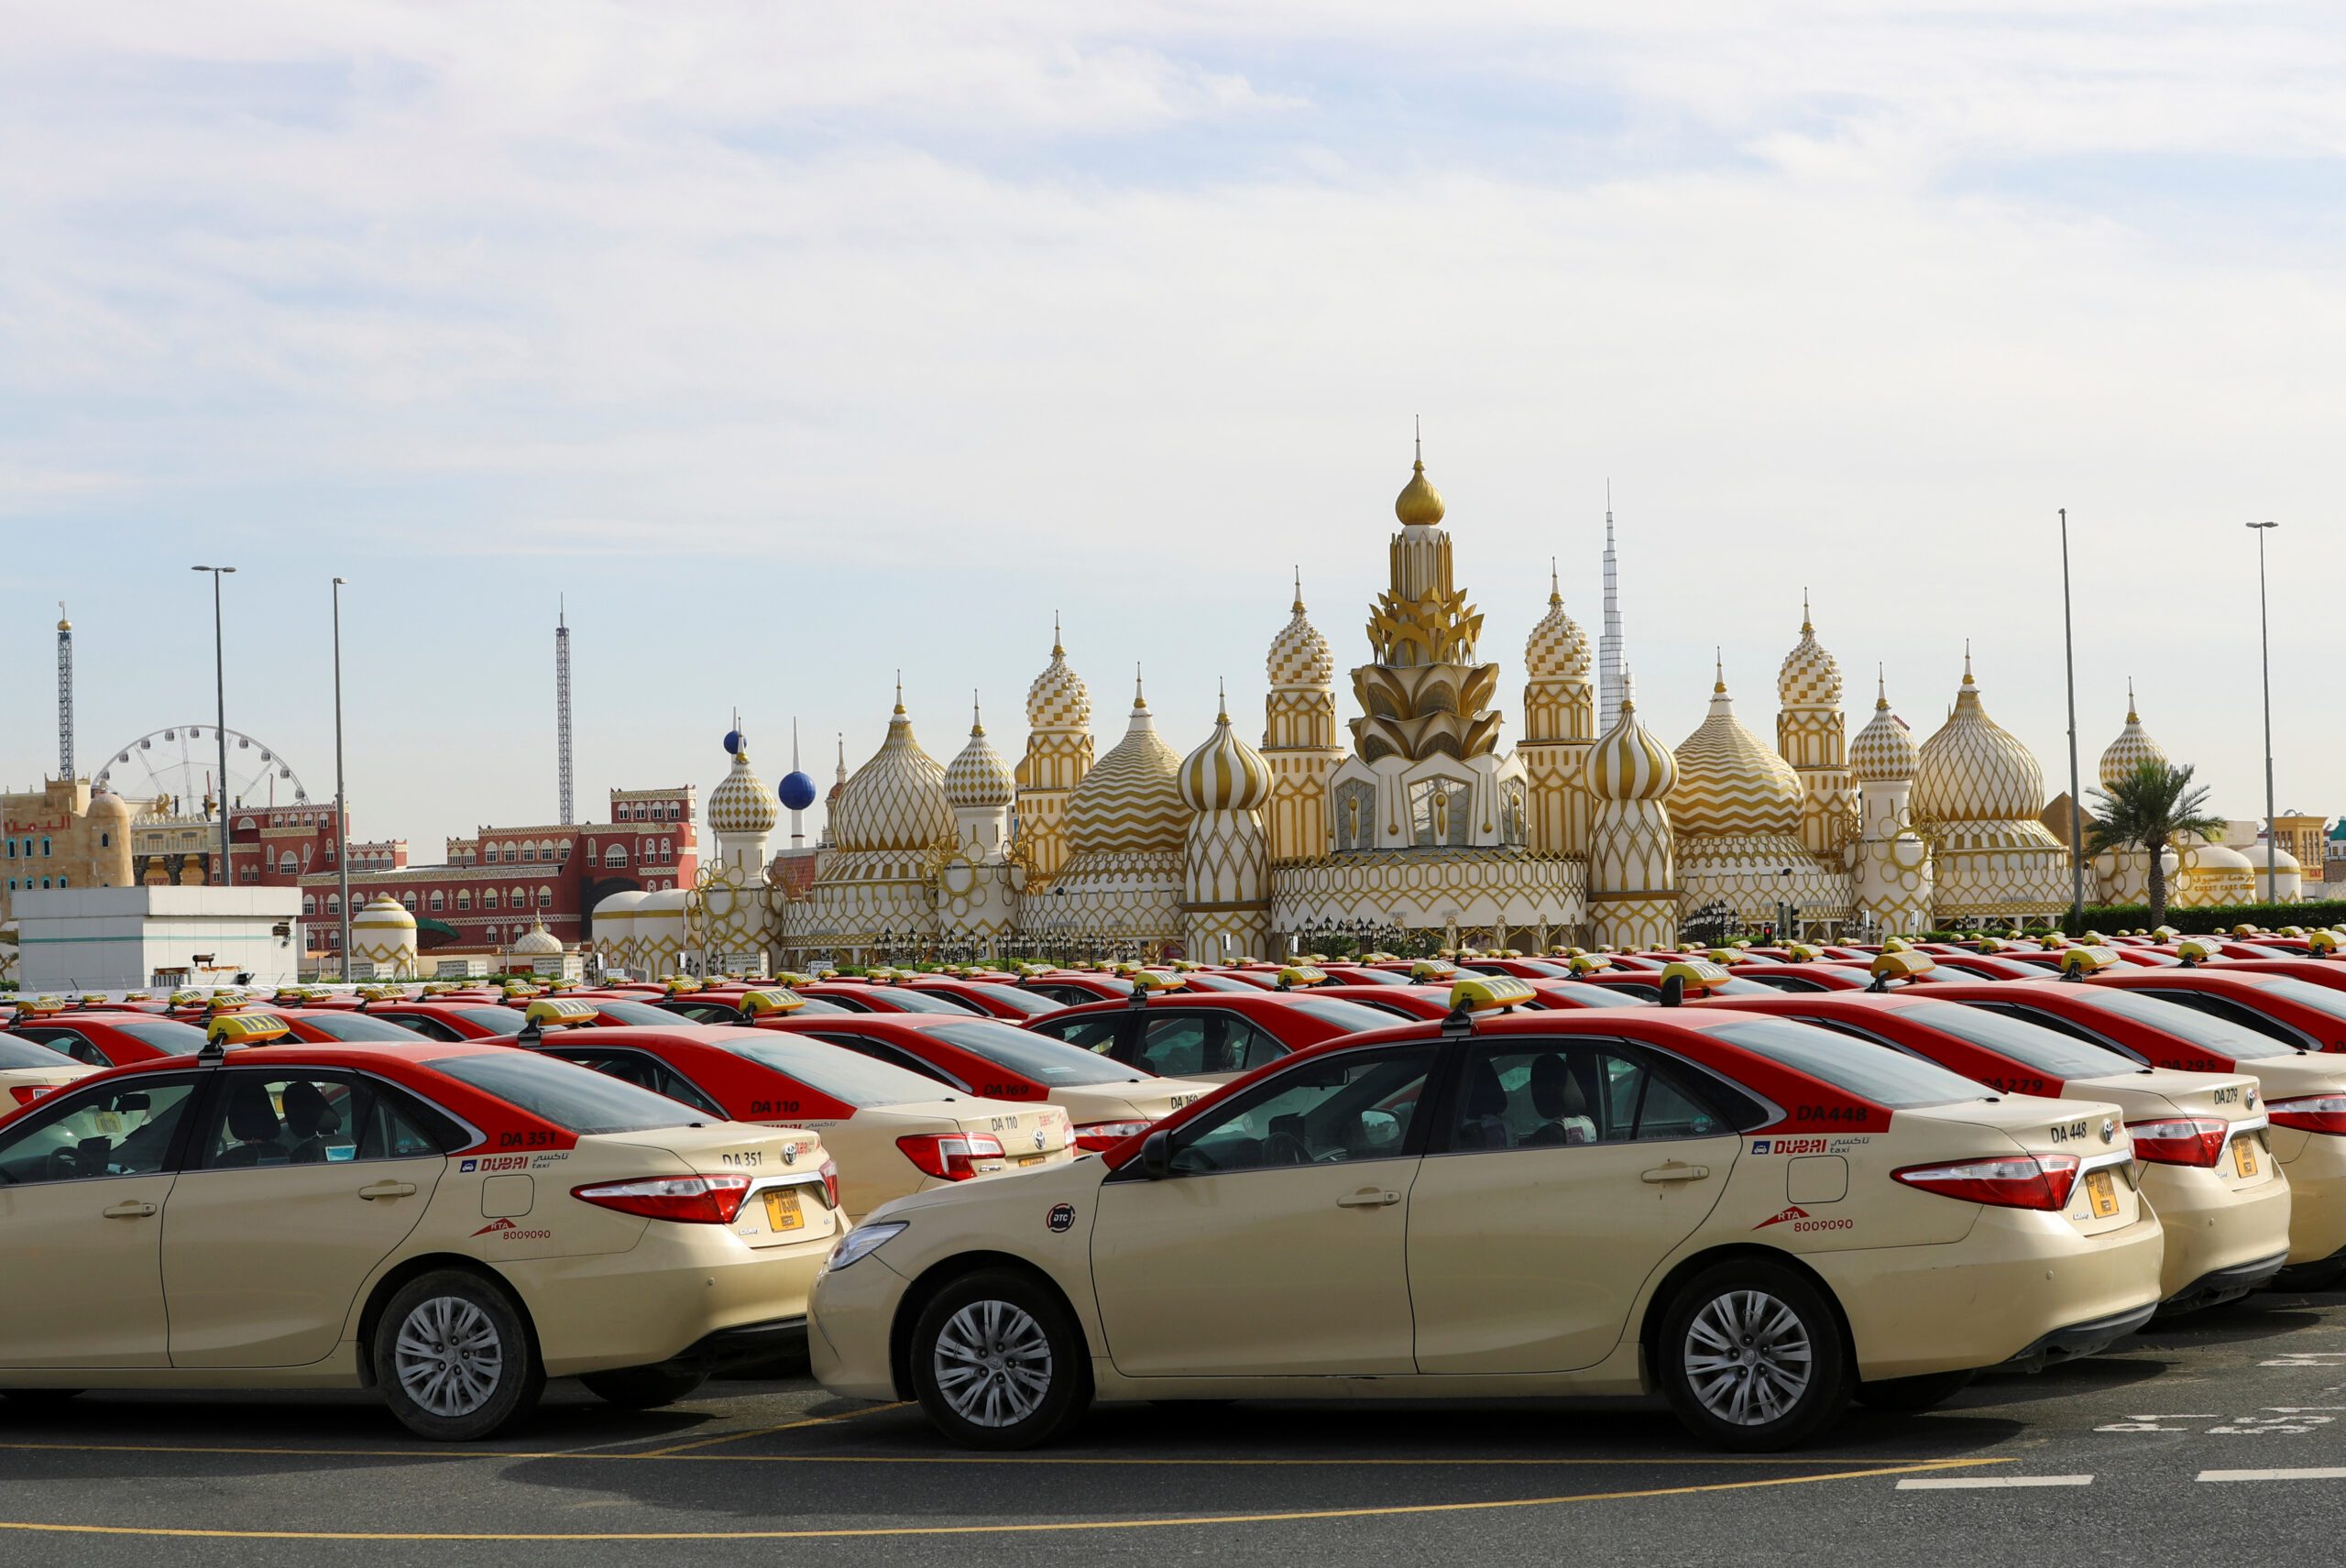 Dubai Taxi vehicles in front of Dubai Global Village. Taxis and limousines completed 46 million trips, up 8% year on year